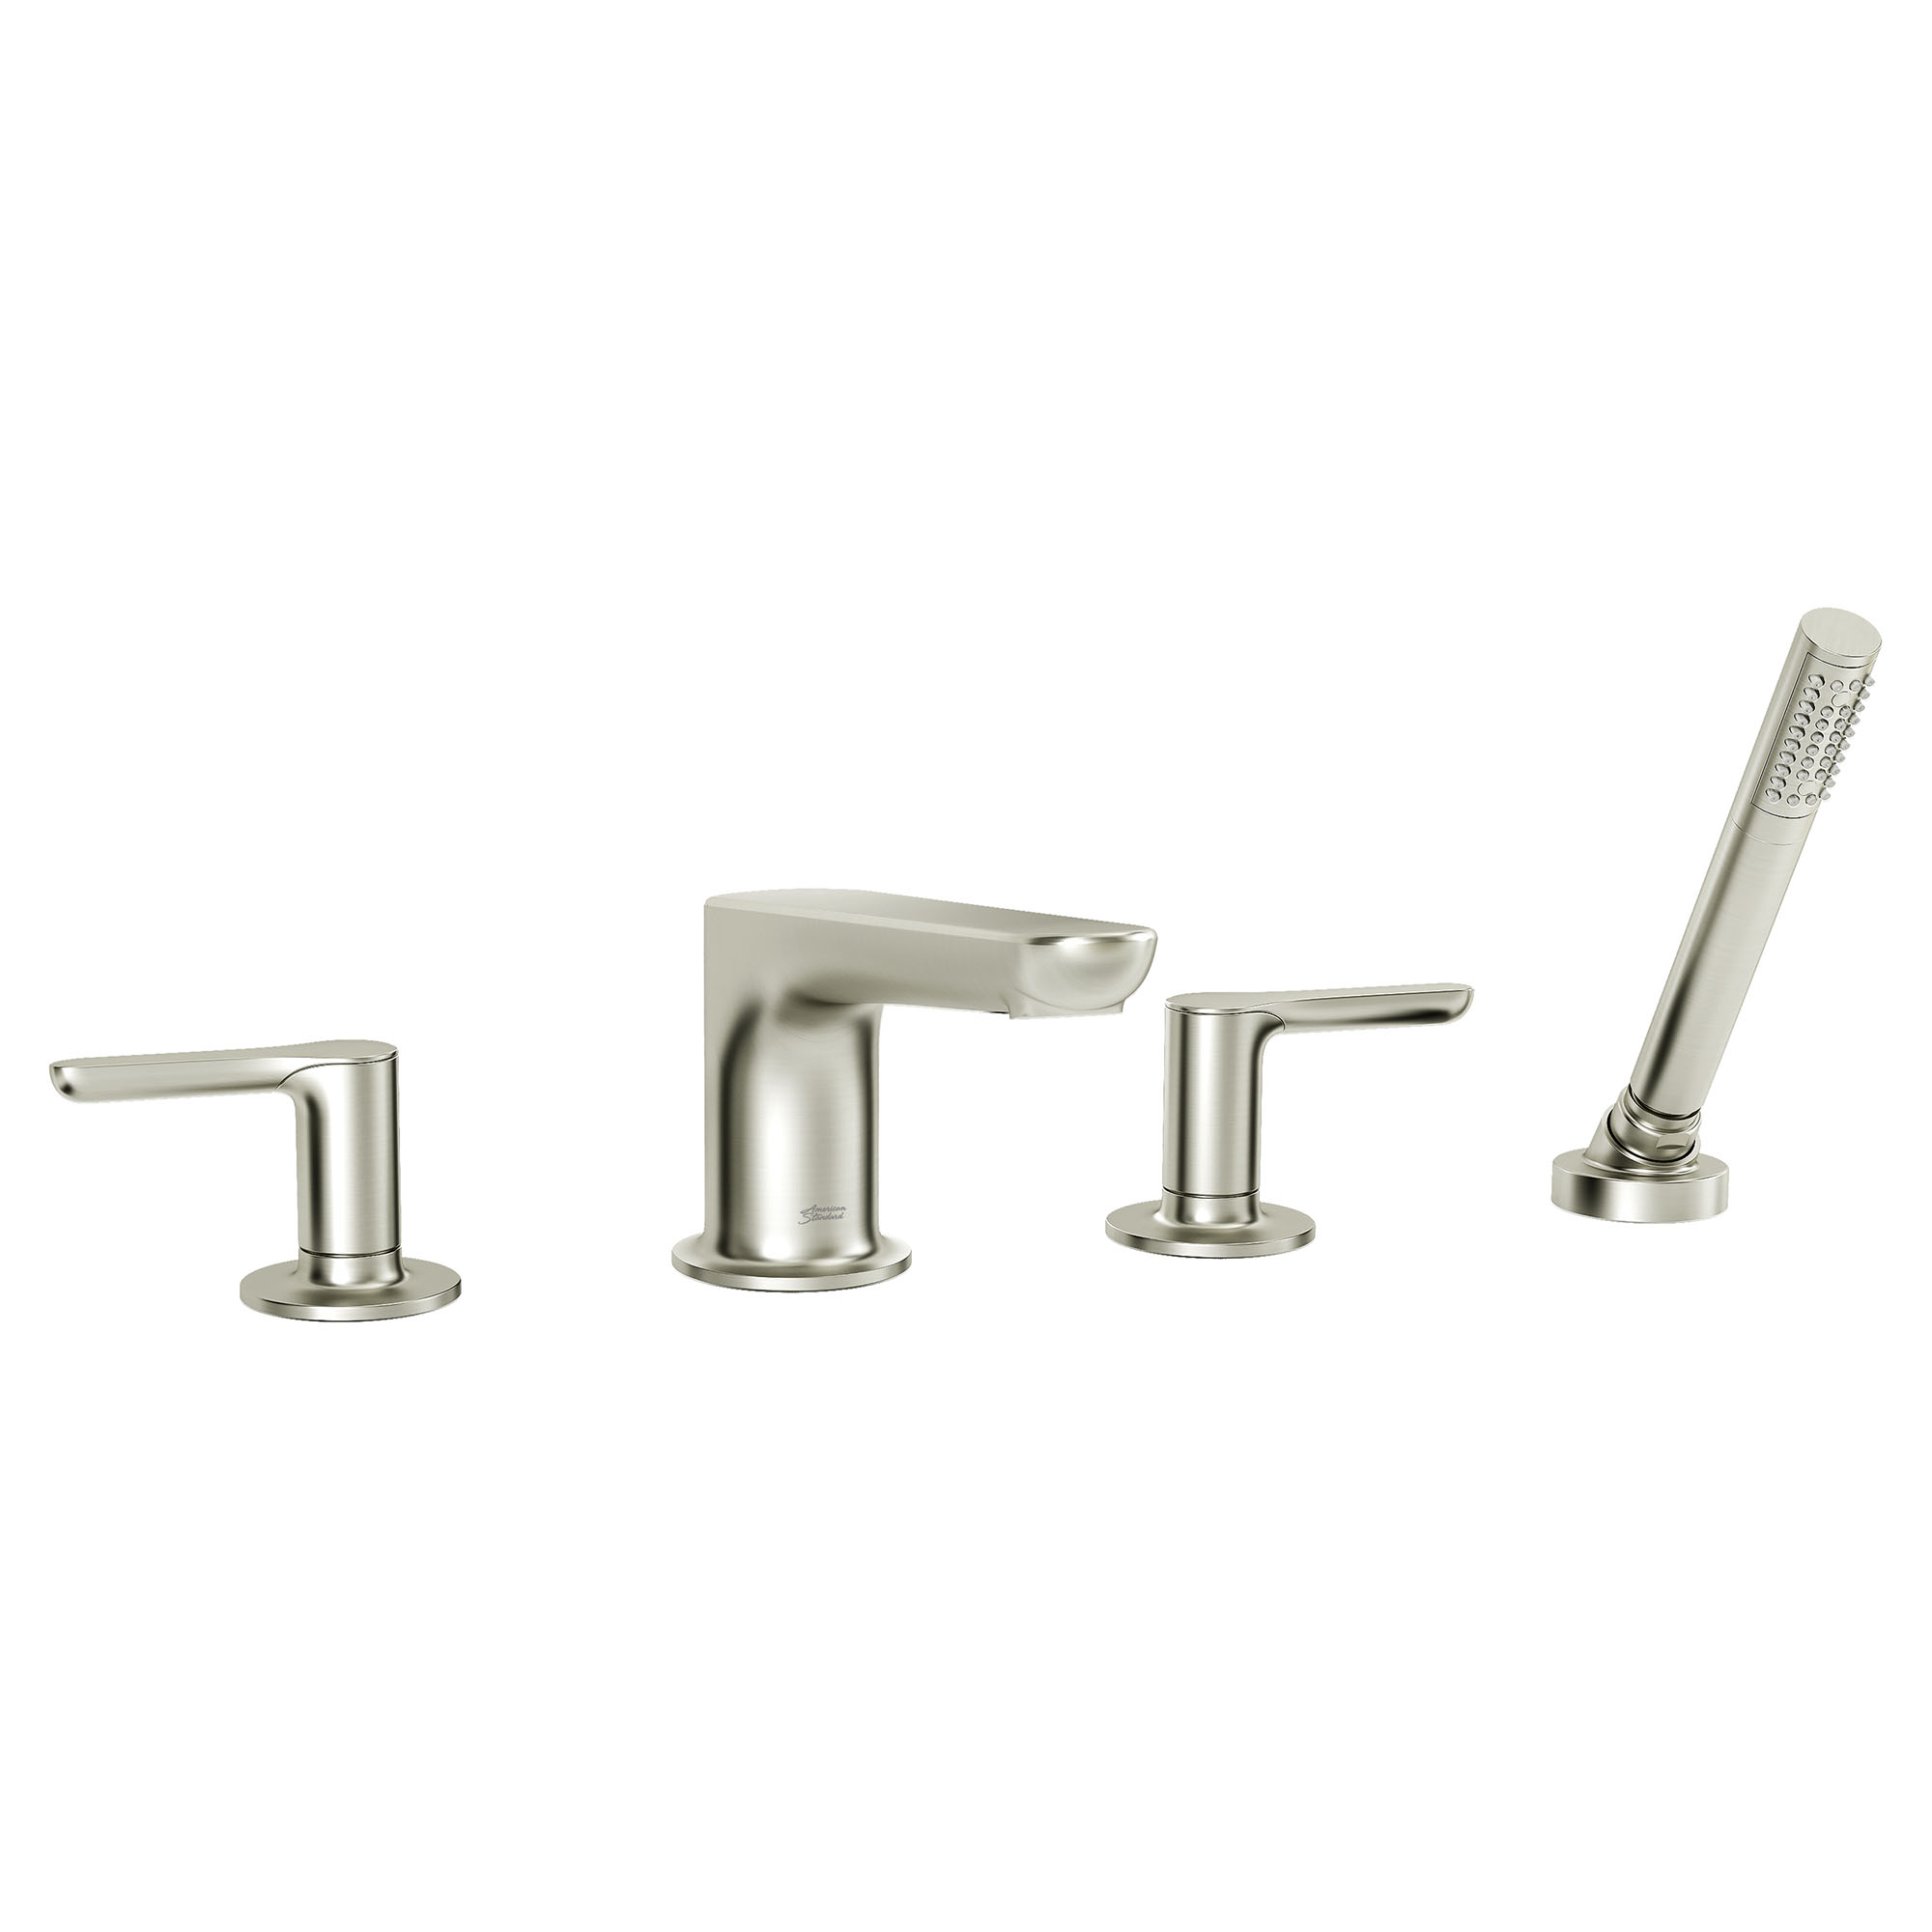 Studio® S  Bathtub Faucet With Lever Handles and Personal Shower for Flash® Rough-In Valve